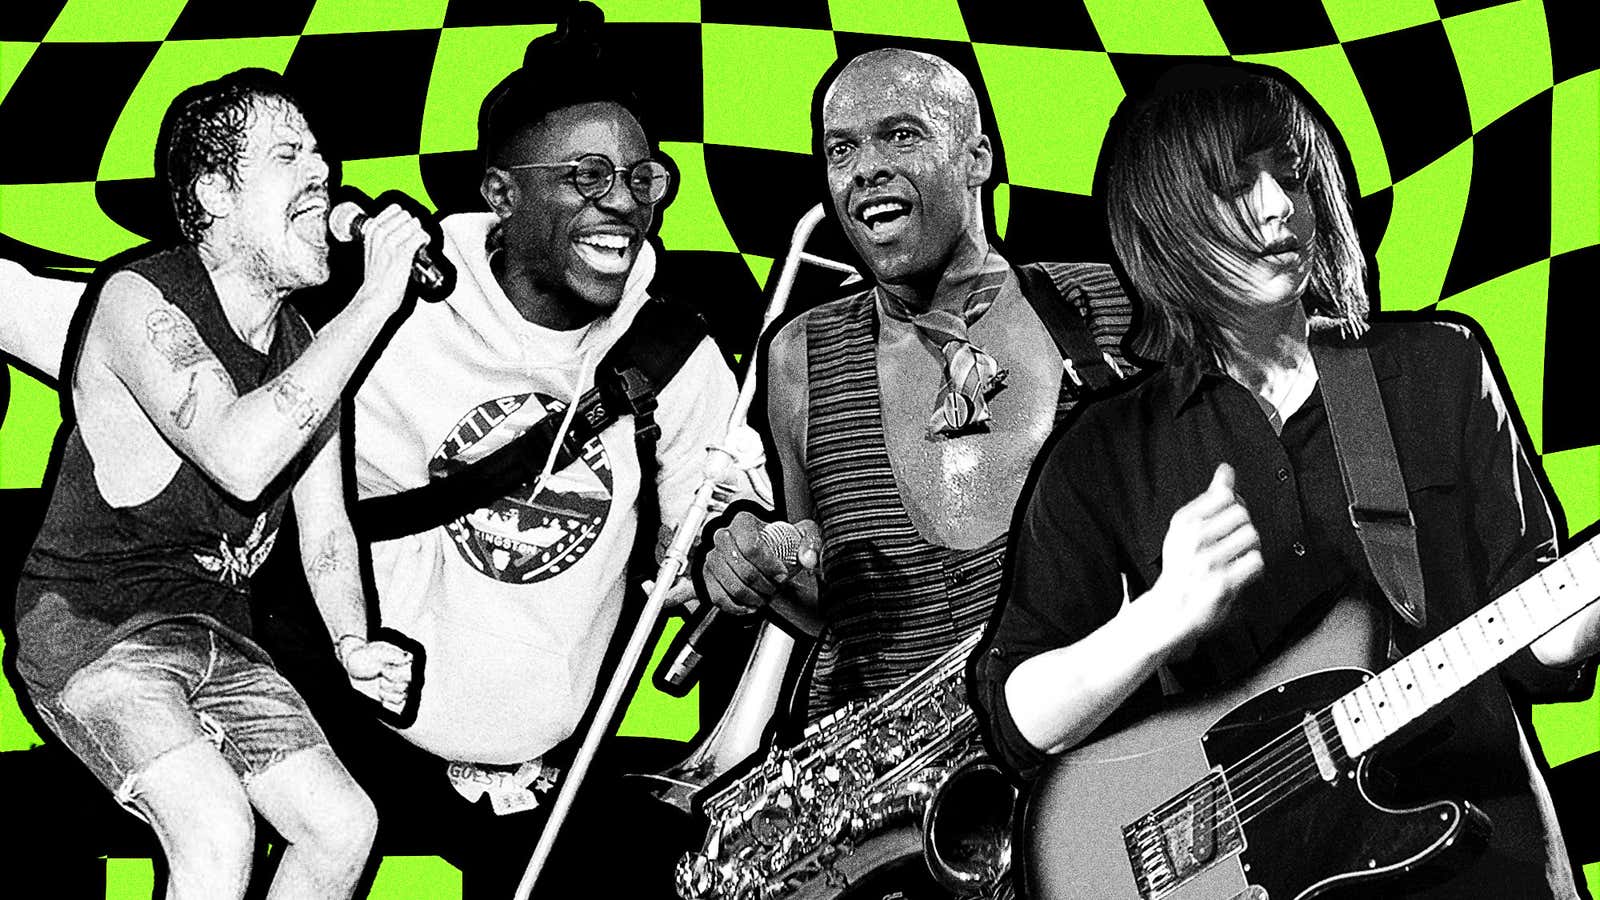 The DIY past, present, and future of ska